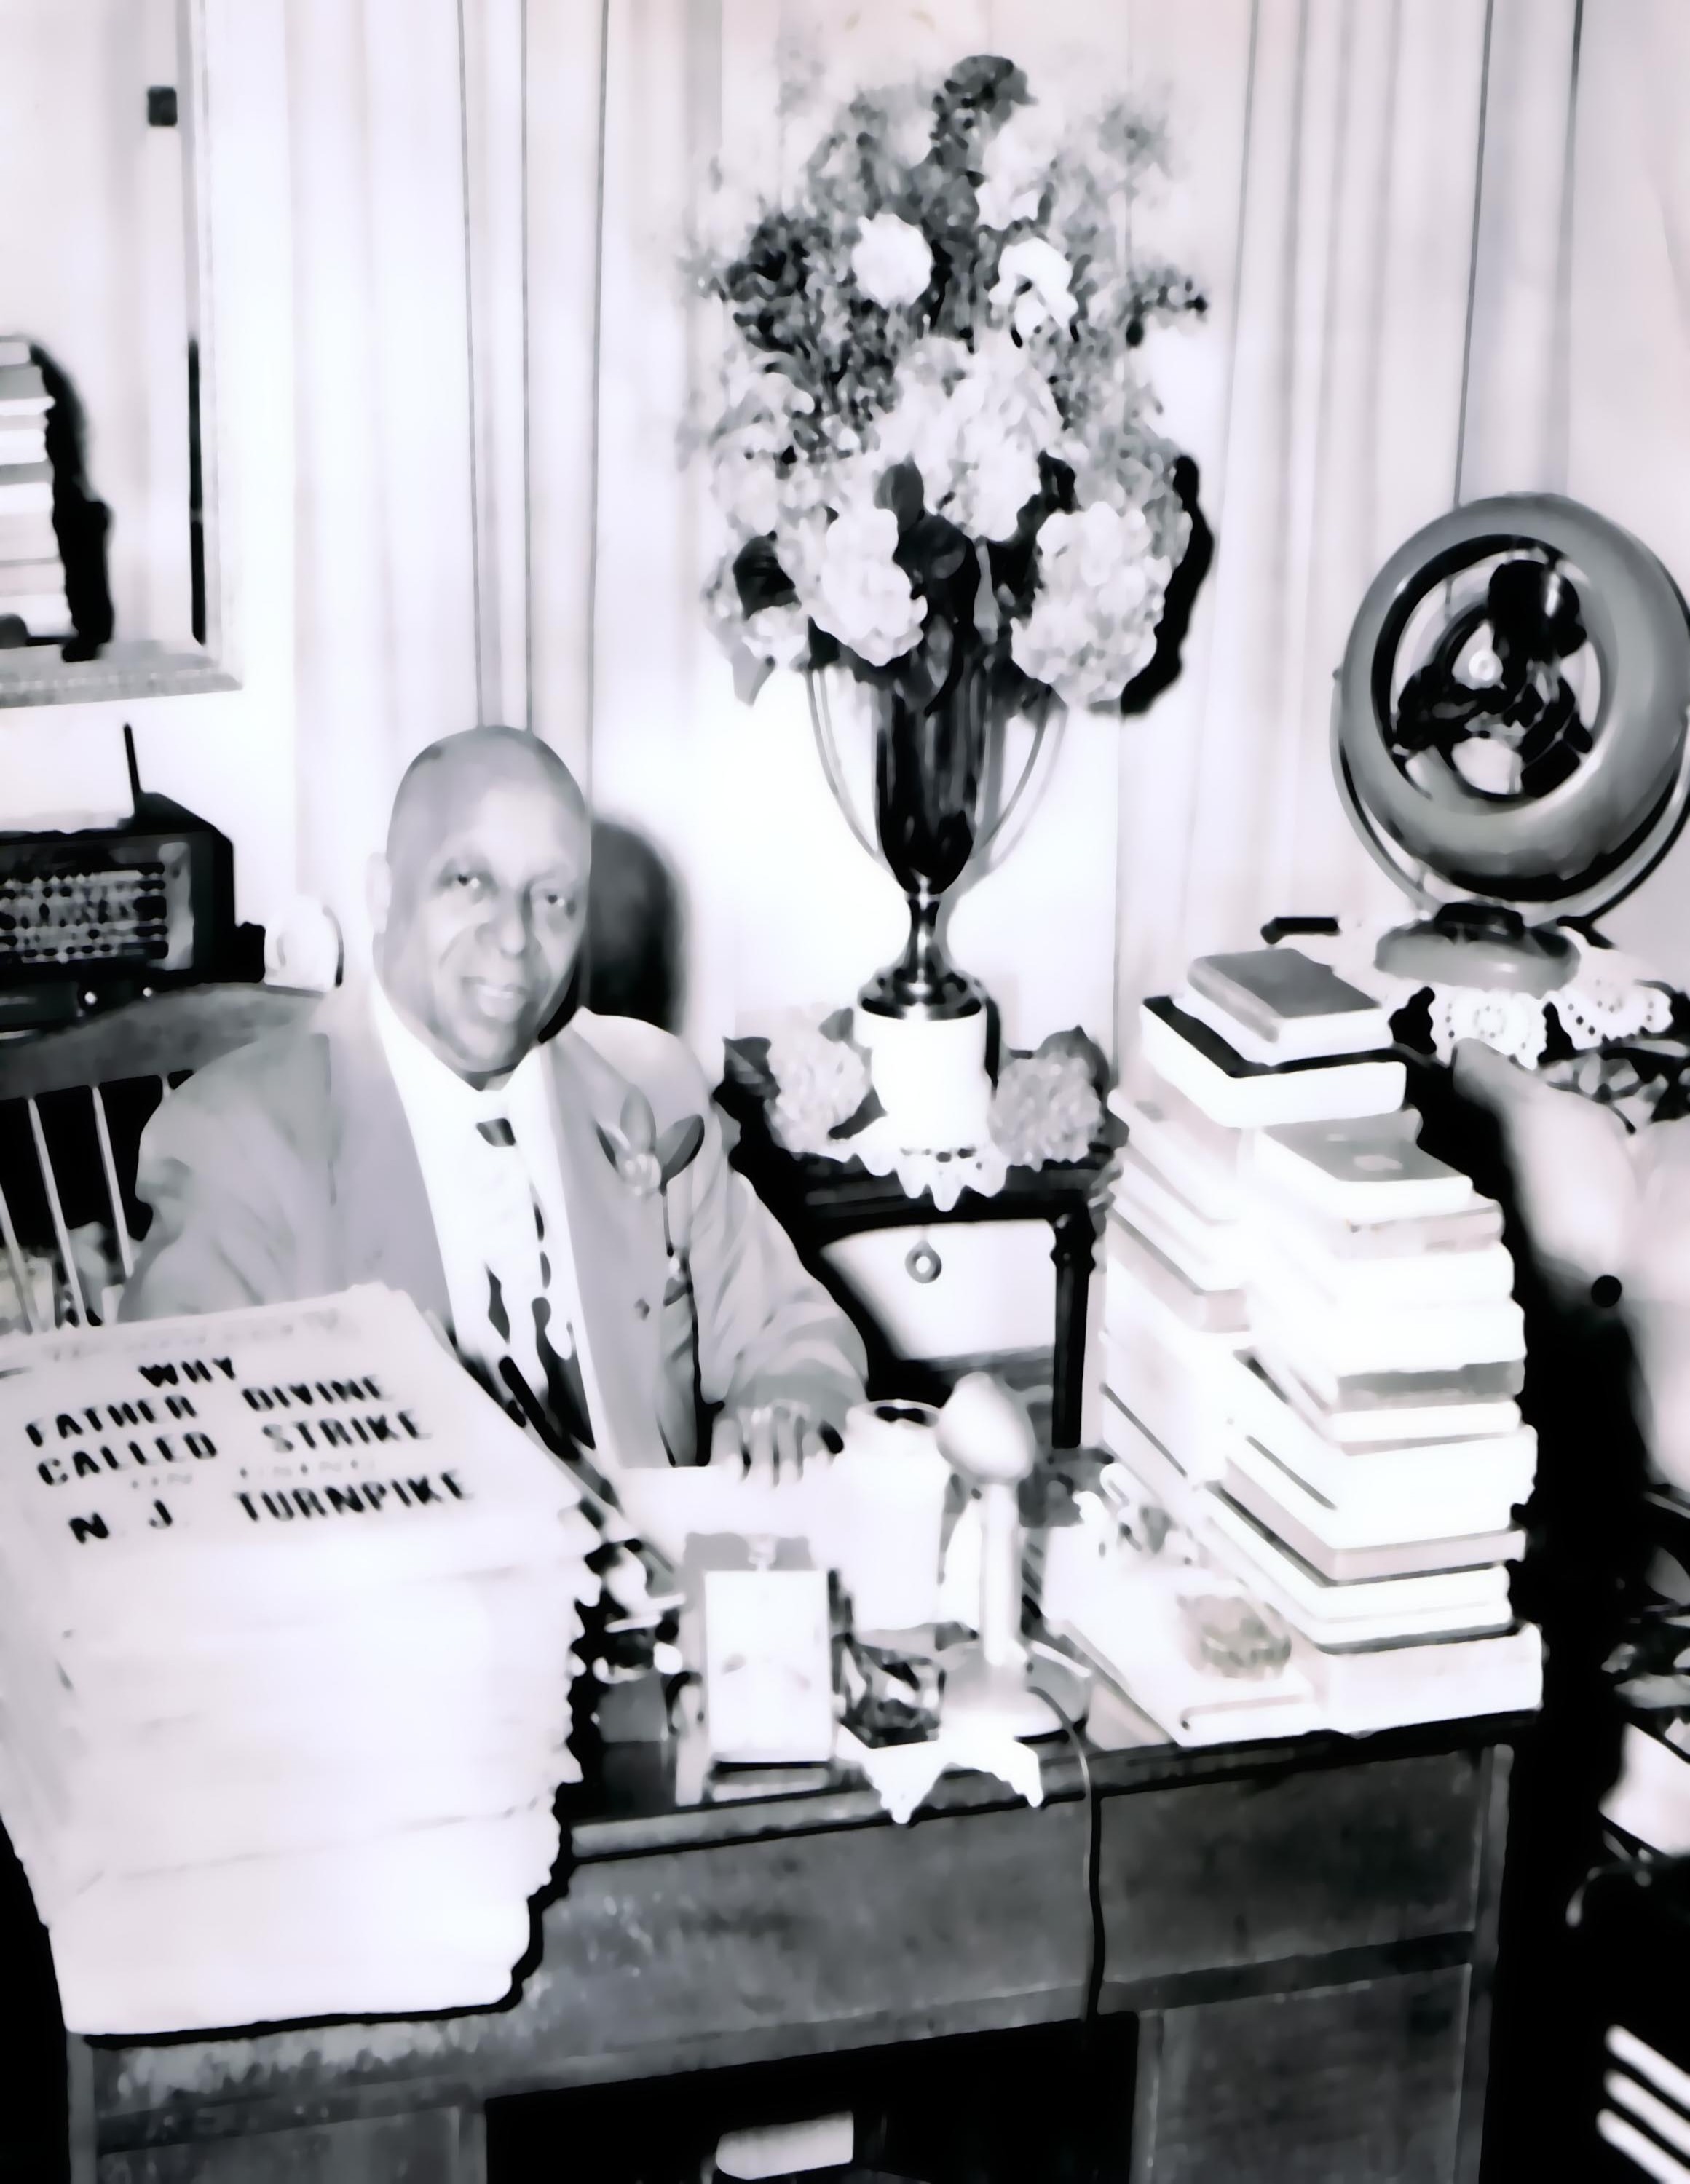 FATHER DIVINE in His office